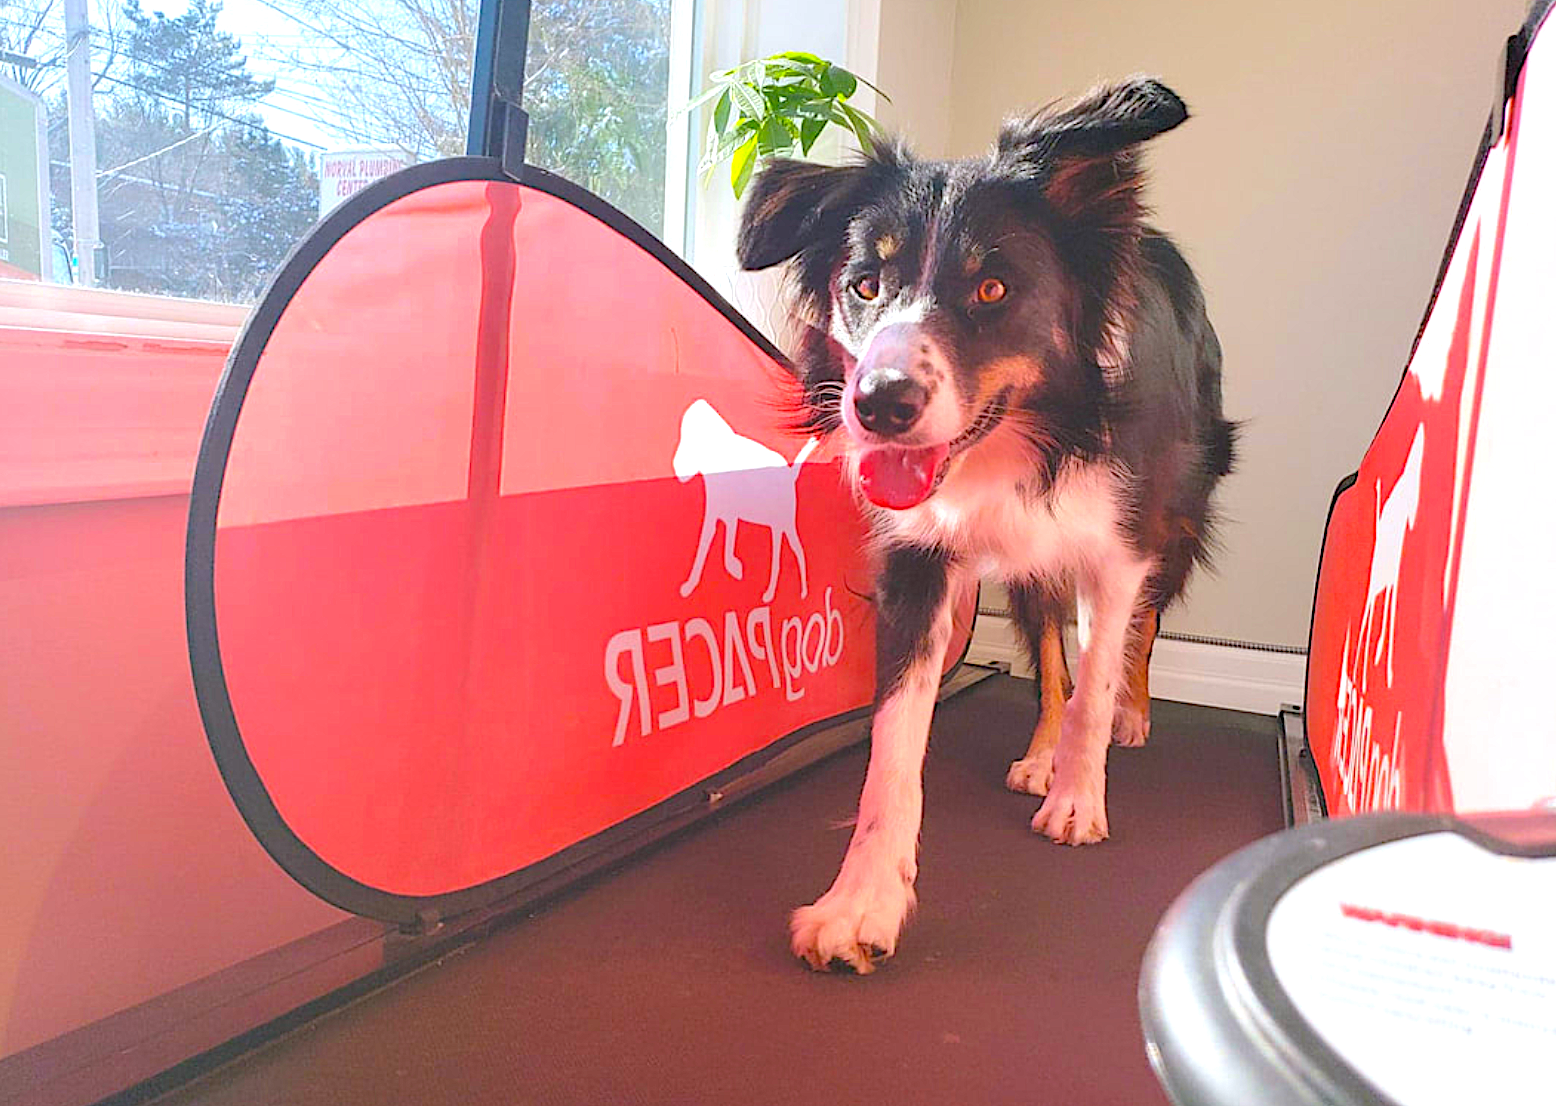 Treadmills for Canine Conditioning Programs: What You Should Know